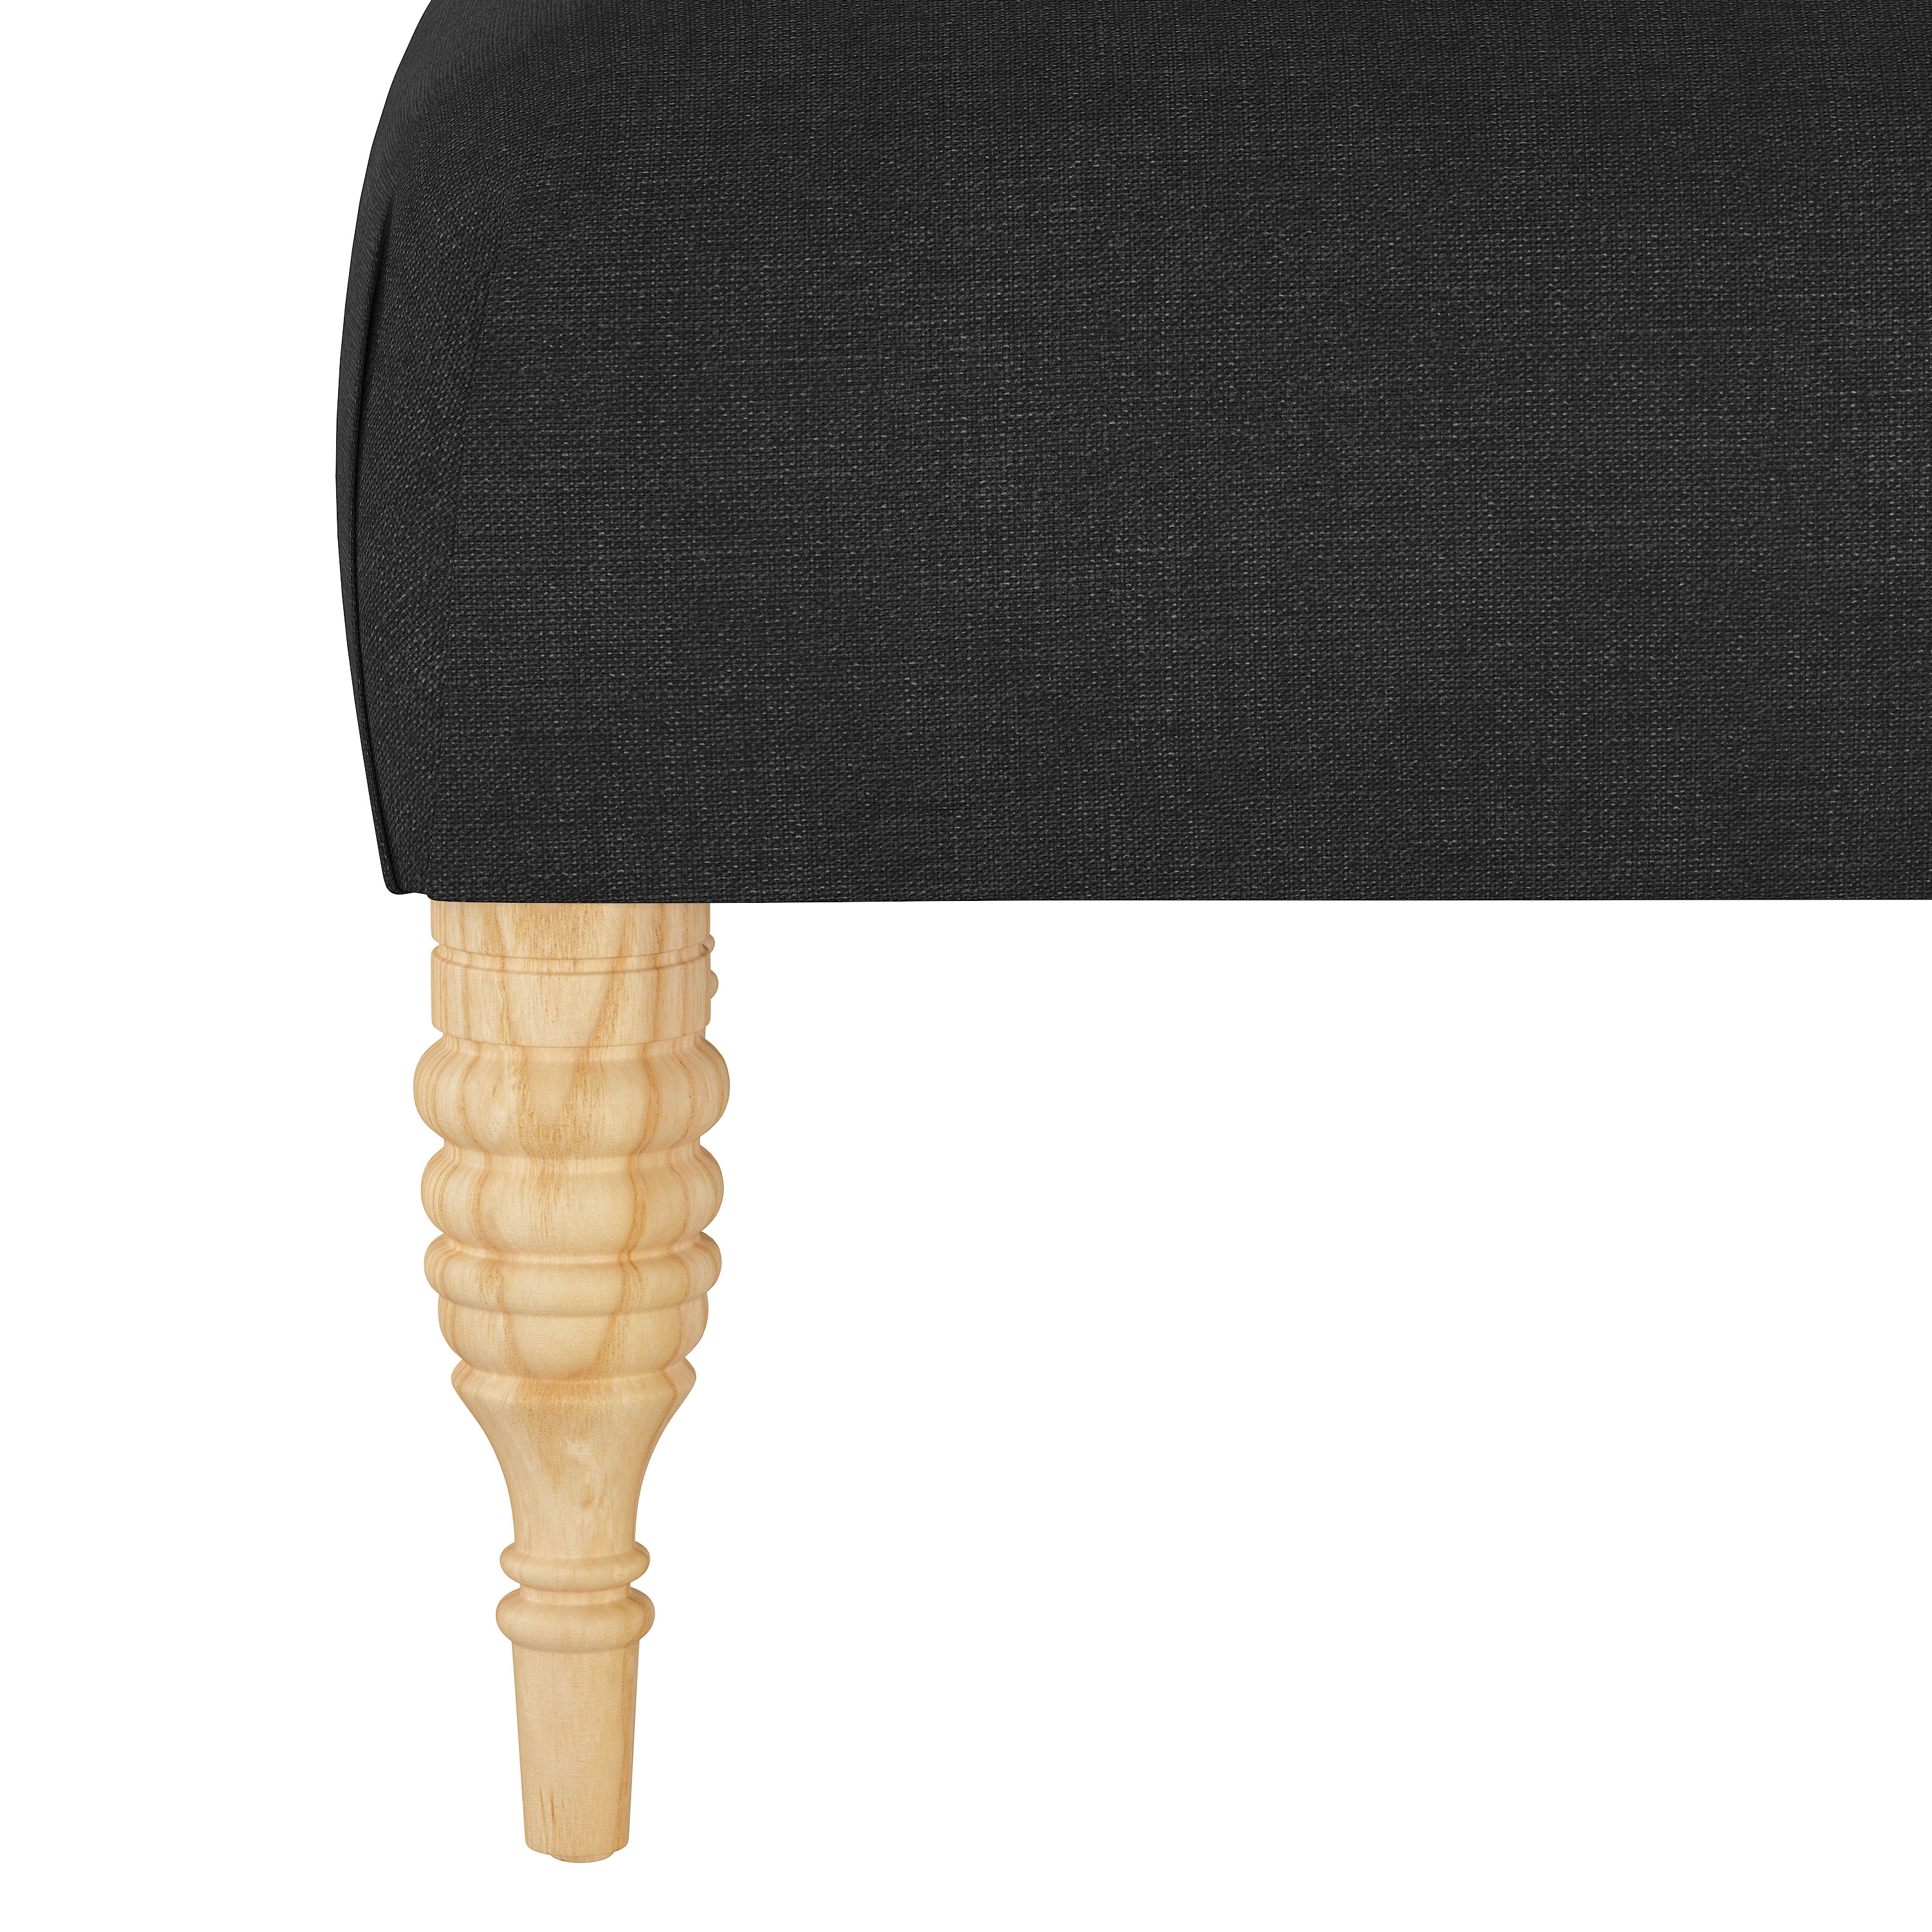 Algren Cocktail Ottoman with Turned Legs - Image 2